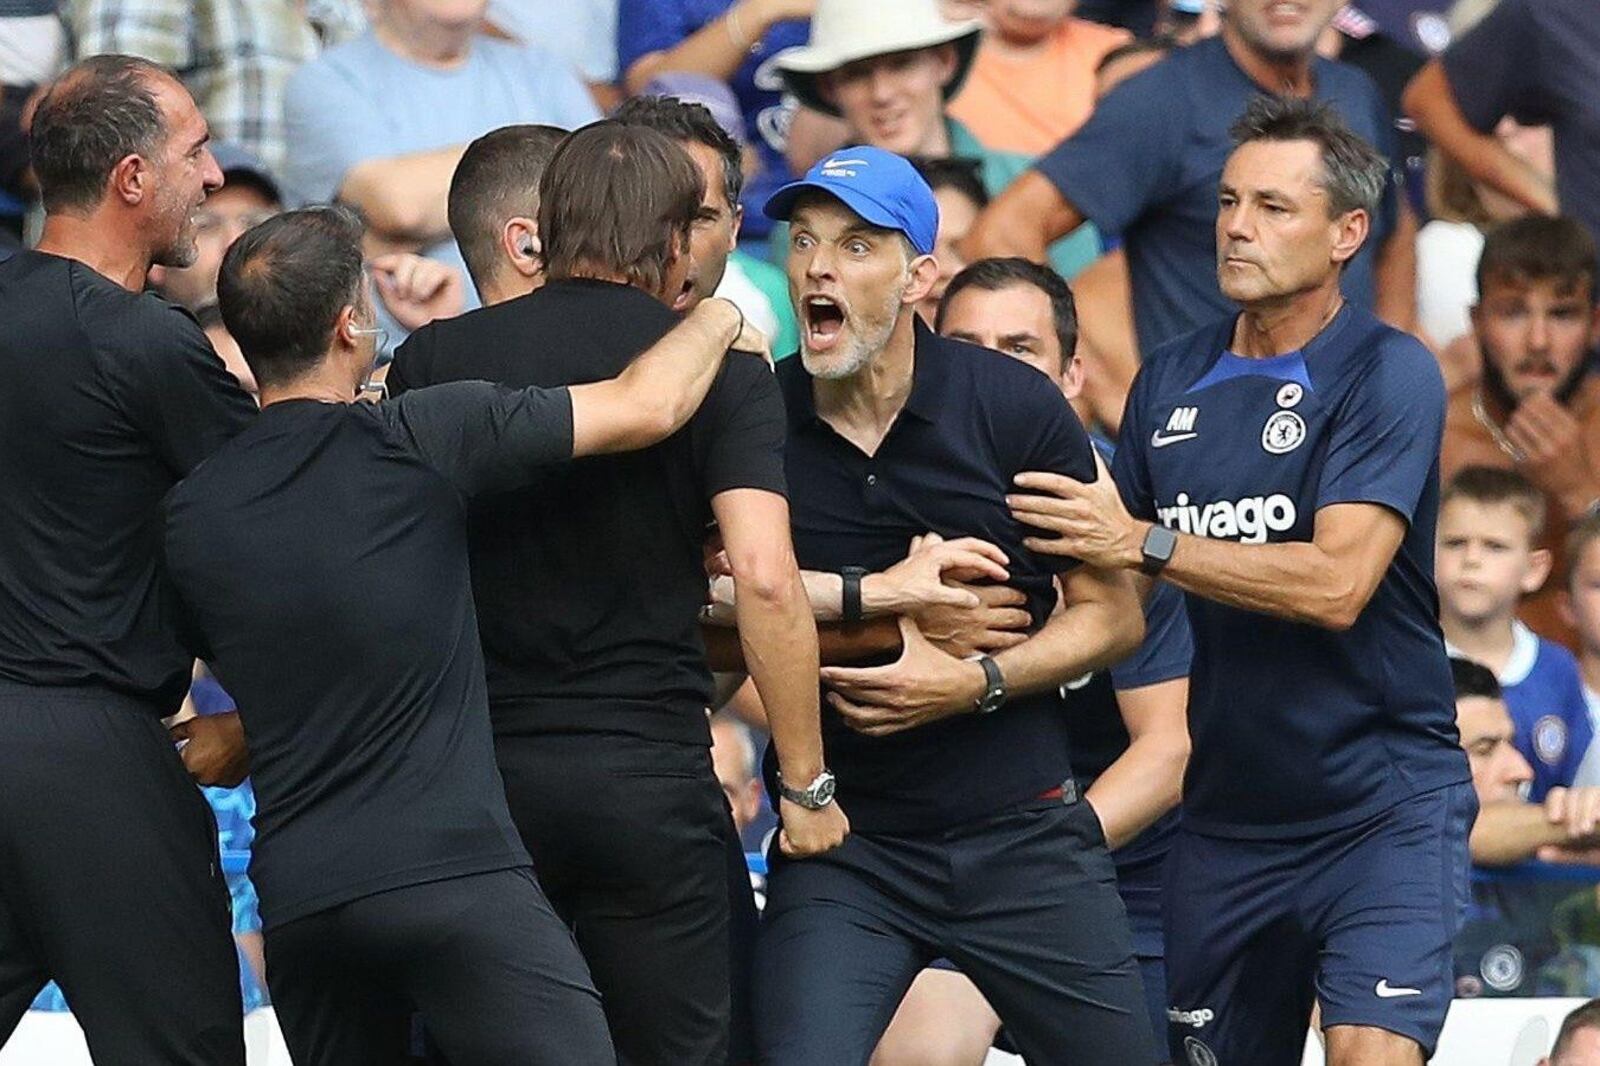 Why the fight broke out in Chelsea's match, Tuchel and Conte's confrontation